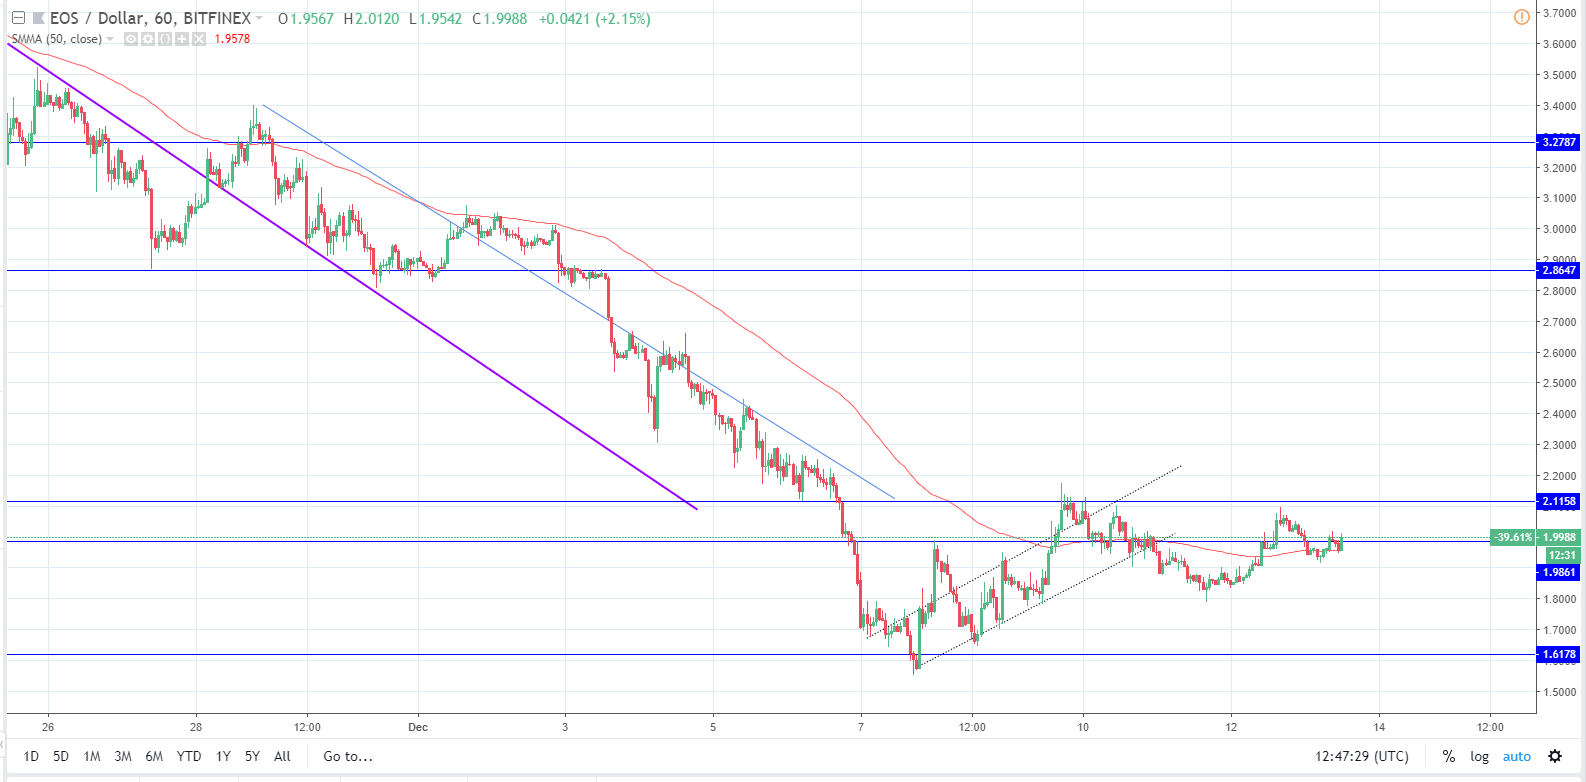 LTC/USD and EOS/USD - more downside expected